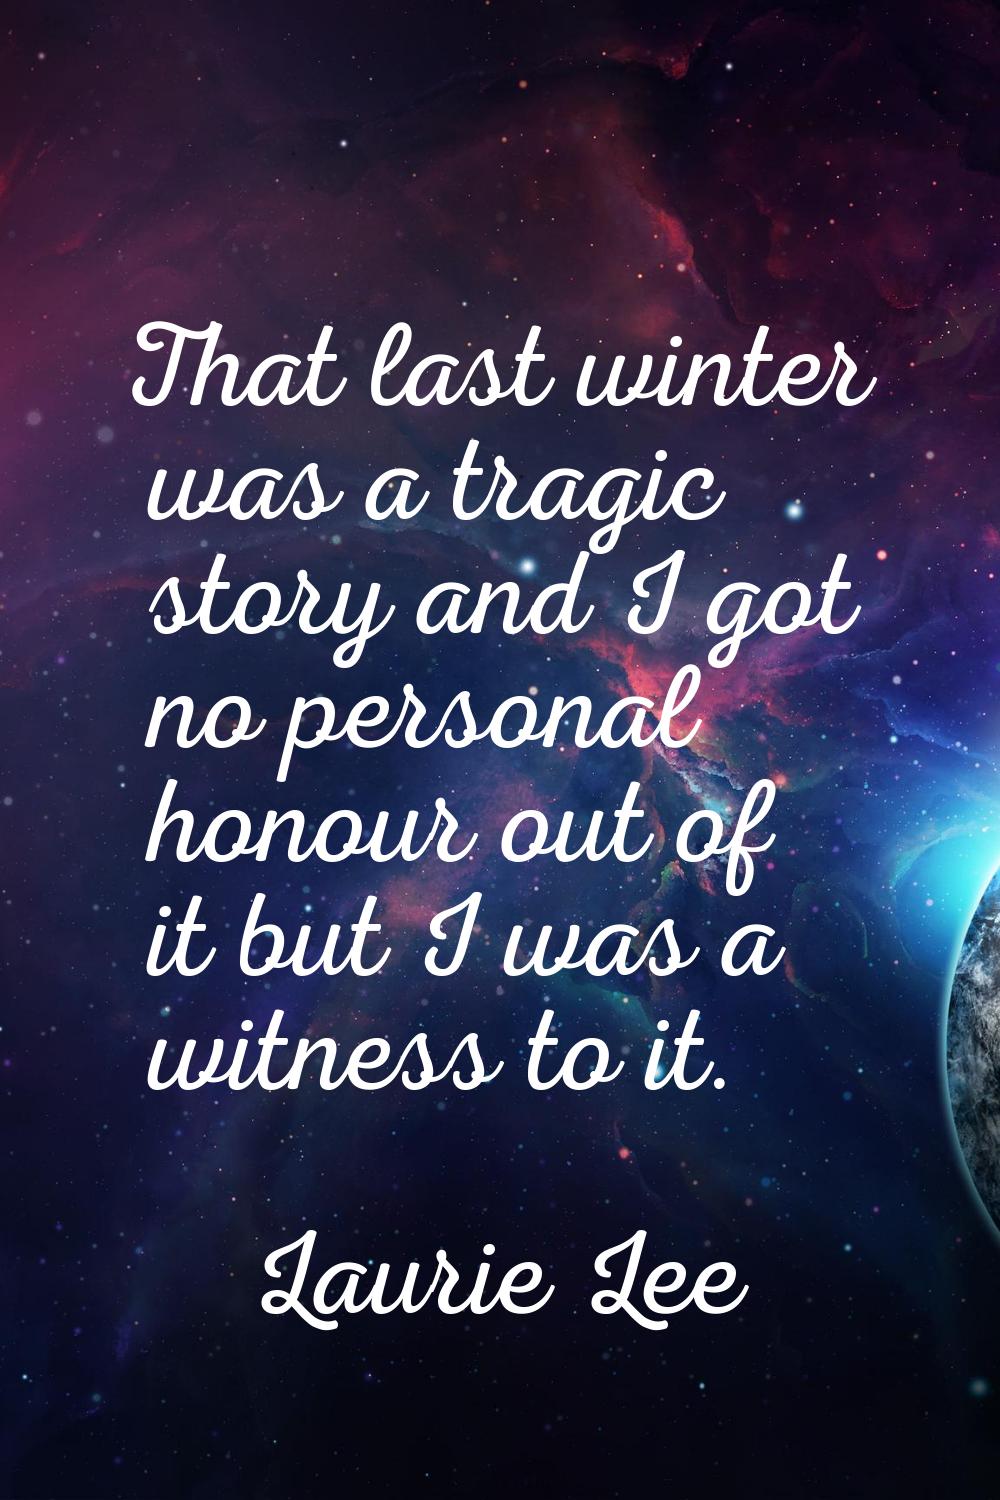 That last winter was a tragic story and I got no personal honour out of it but I was a witness to i